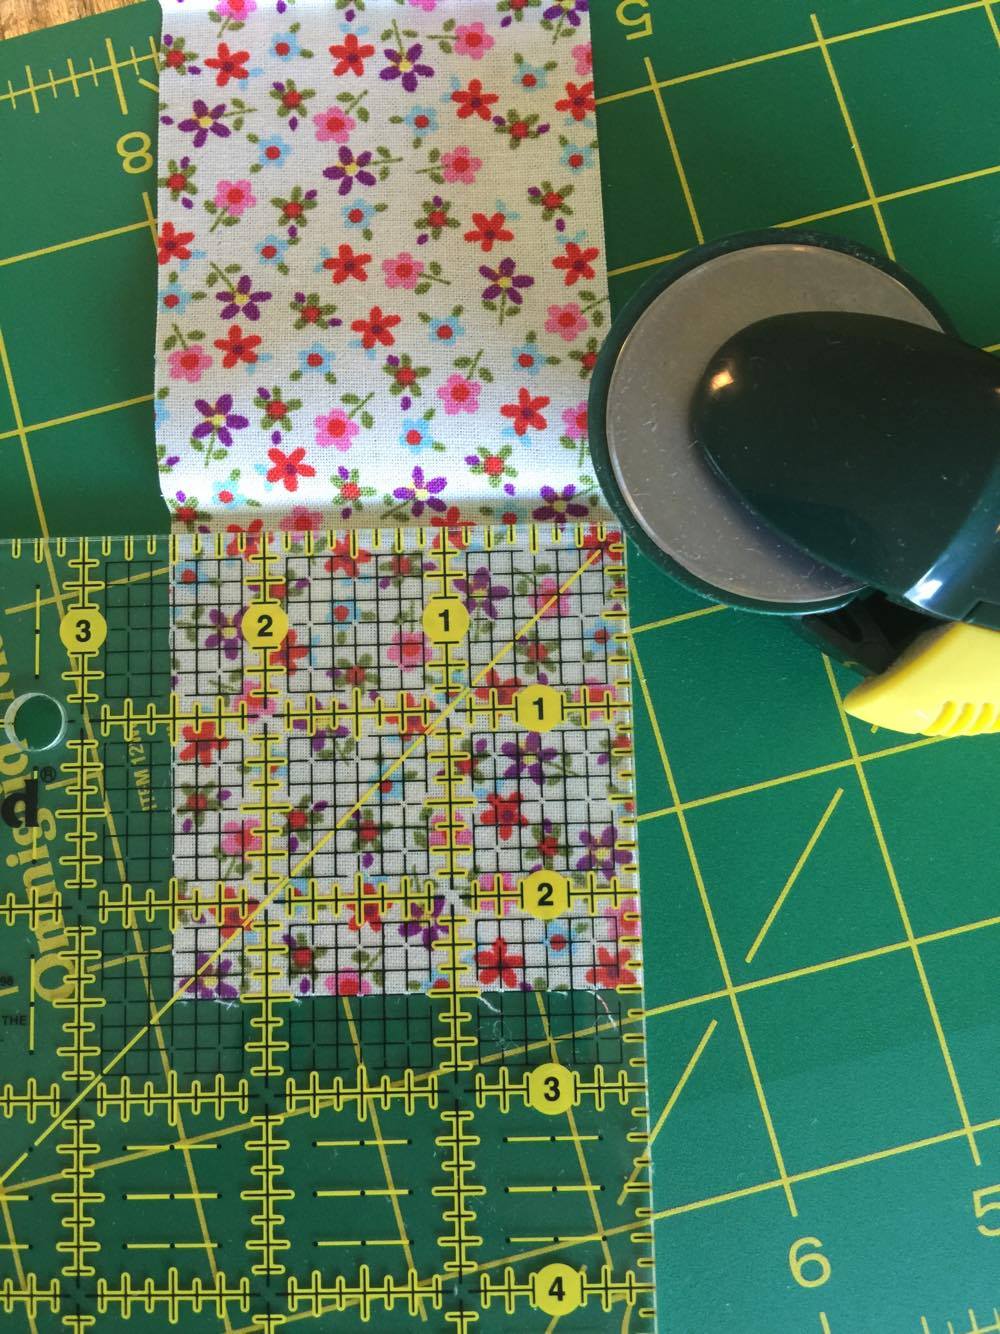 Fabric Scrap Tea Towel - a great Mother's Day gift idea!